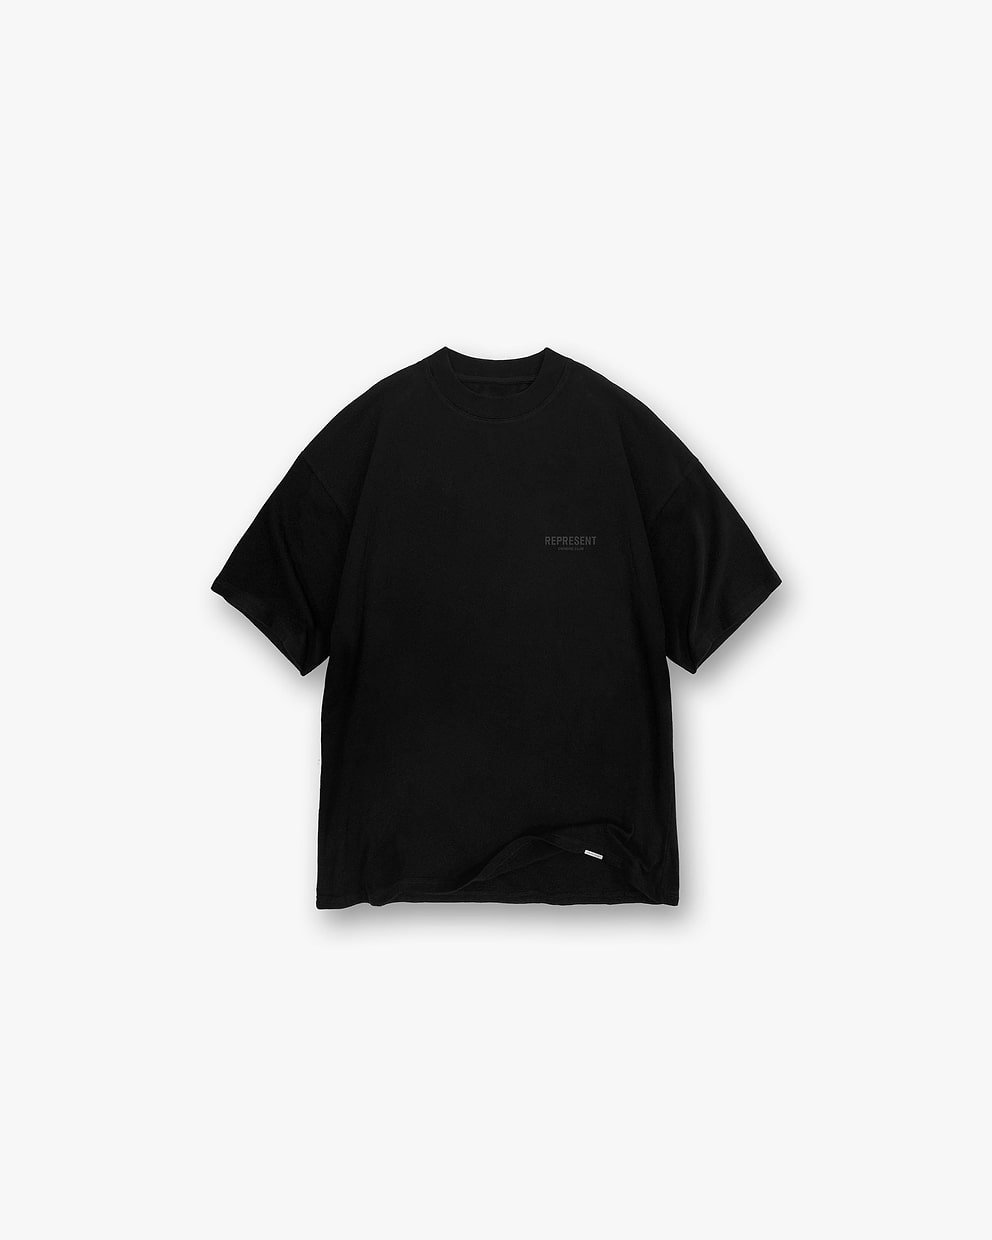 Represent Owners Club T-Shirt - Black Reflective